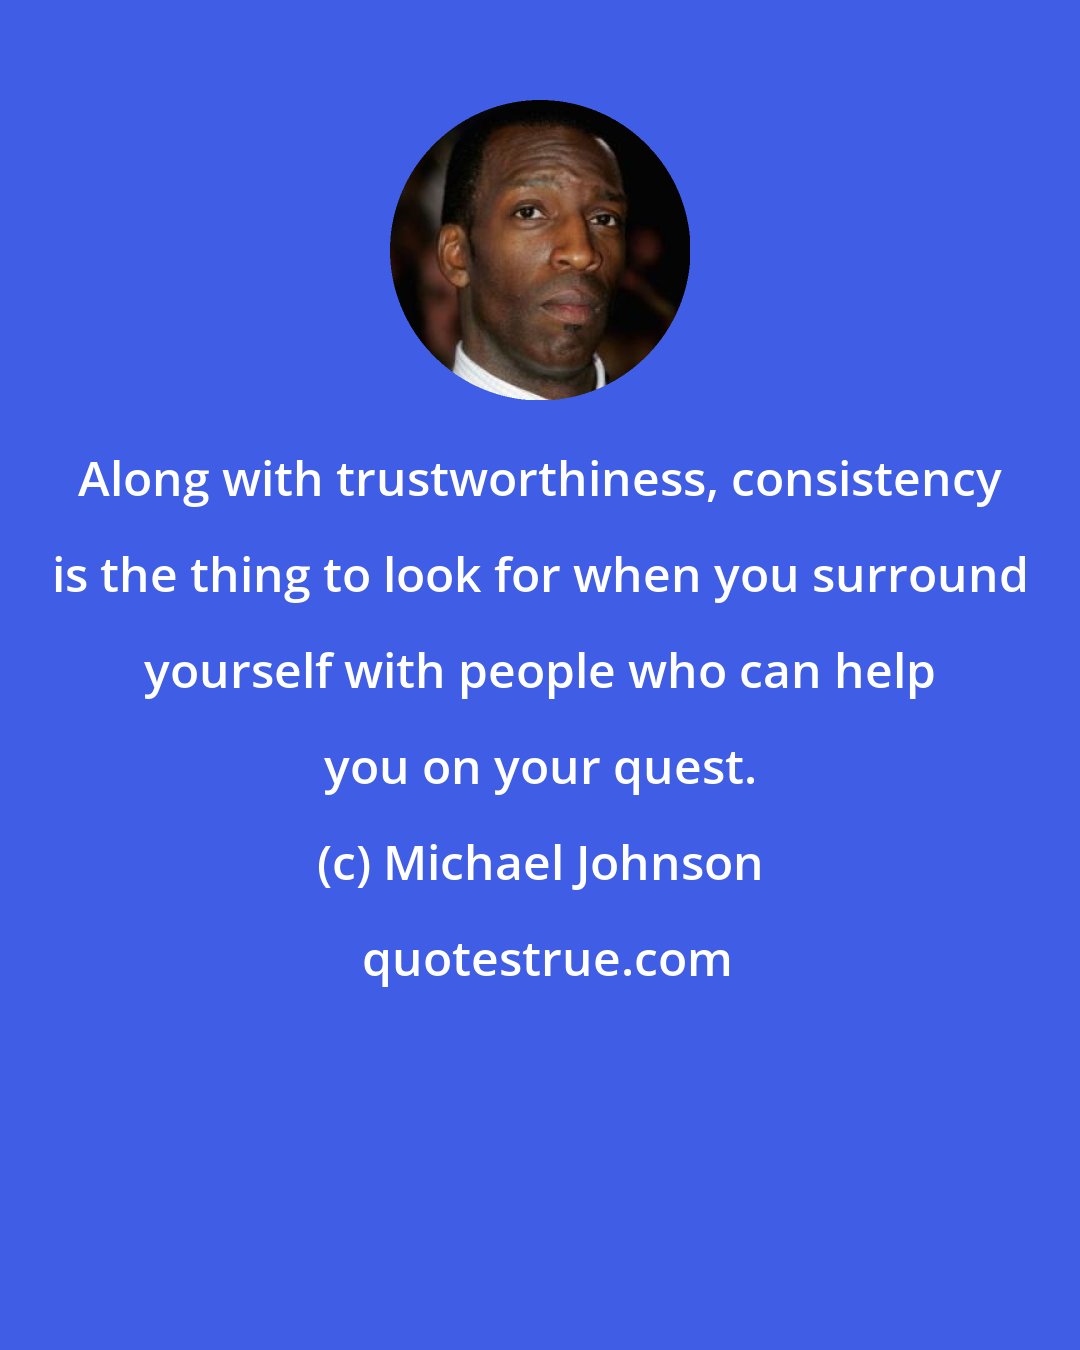 Michael Johnson: Along with trustworthiness, consistency is the thing to look for when you surround yourself with people who can help you on your quest.